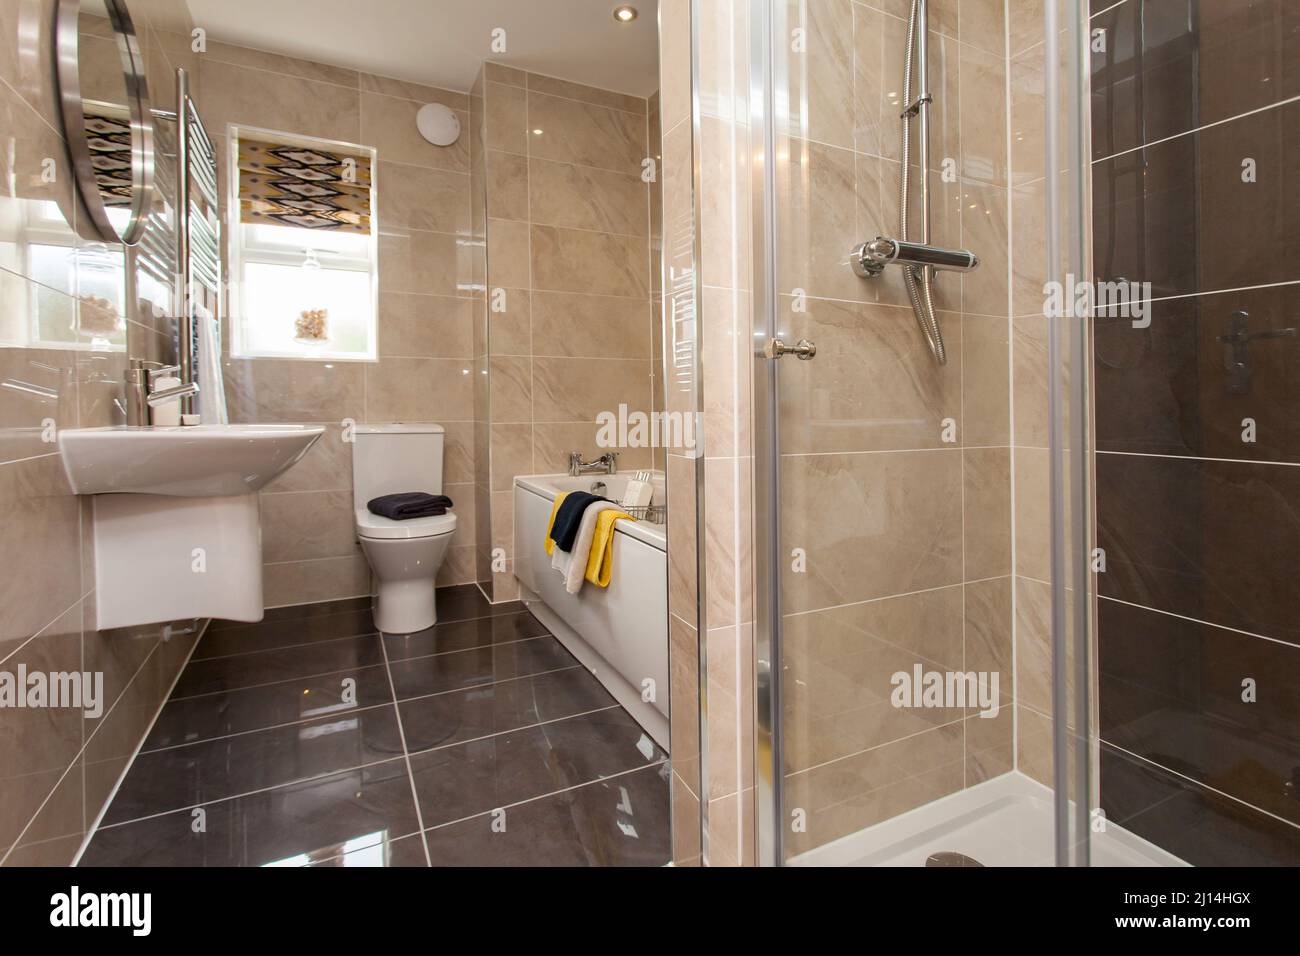 Modern bathroom with toilet, shower cubicle, wash basin sink, bath, tiled throughout. Stock Photo